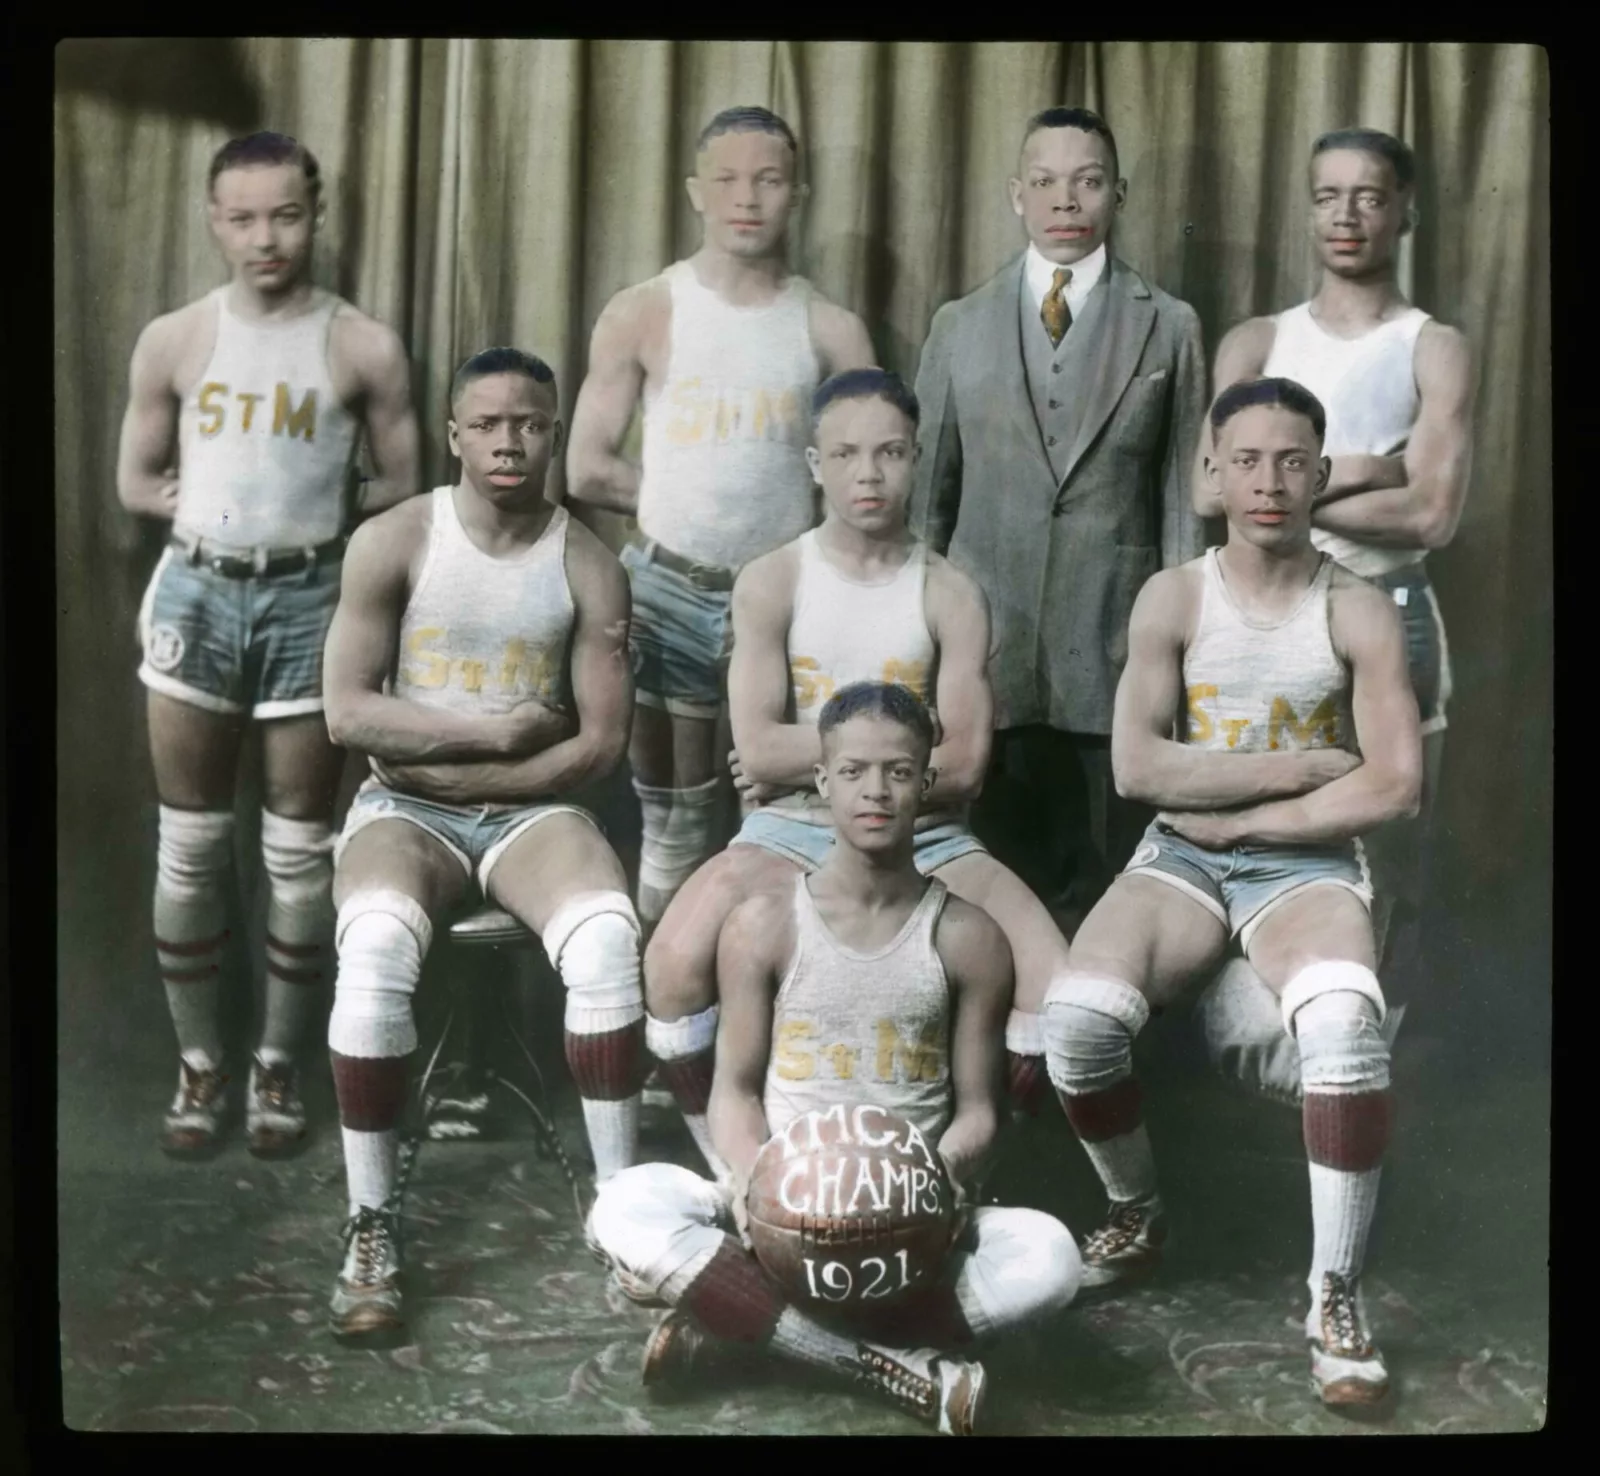 Youth basketball players sit or stand in three rows. They are wearing tank tops, shorts, long socks, and knee pads. The player sitting in the middle holds a basketball. On the basketball are the words “YMCA Champs 1921.”